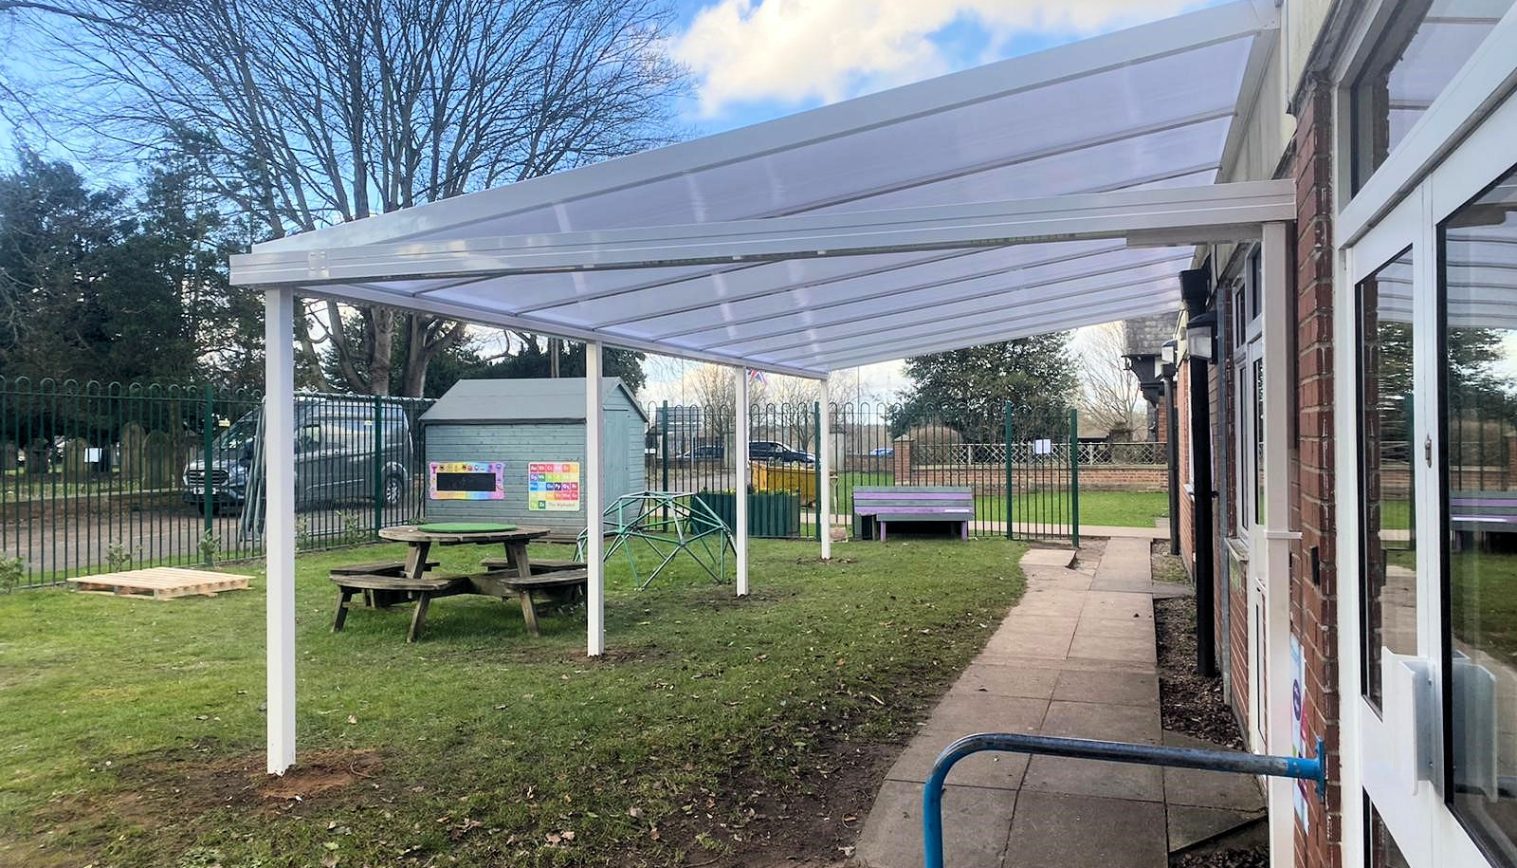 Primary School in Doncaster – Wall Mounted Canopy